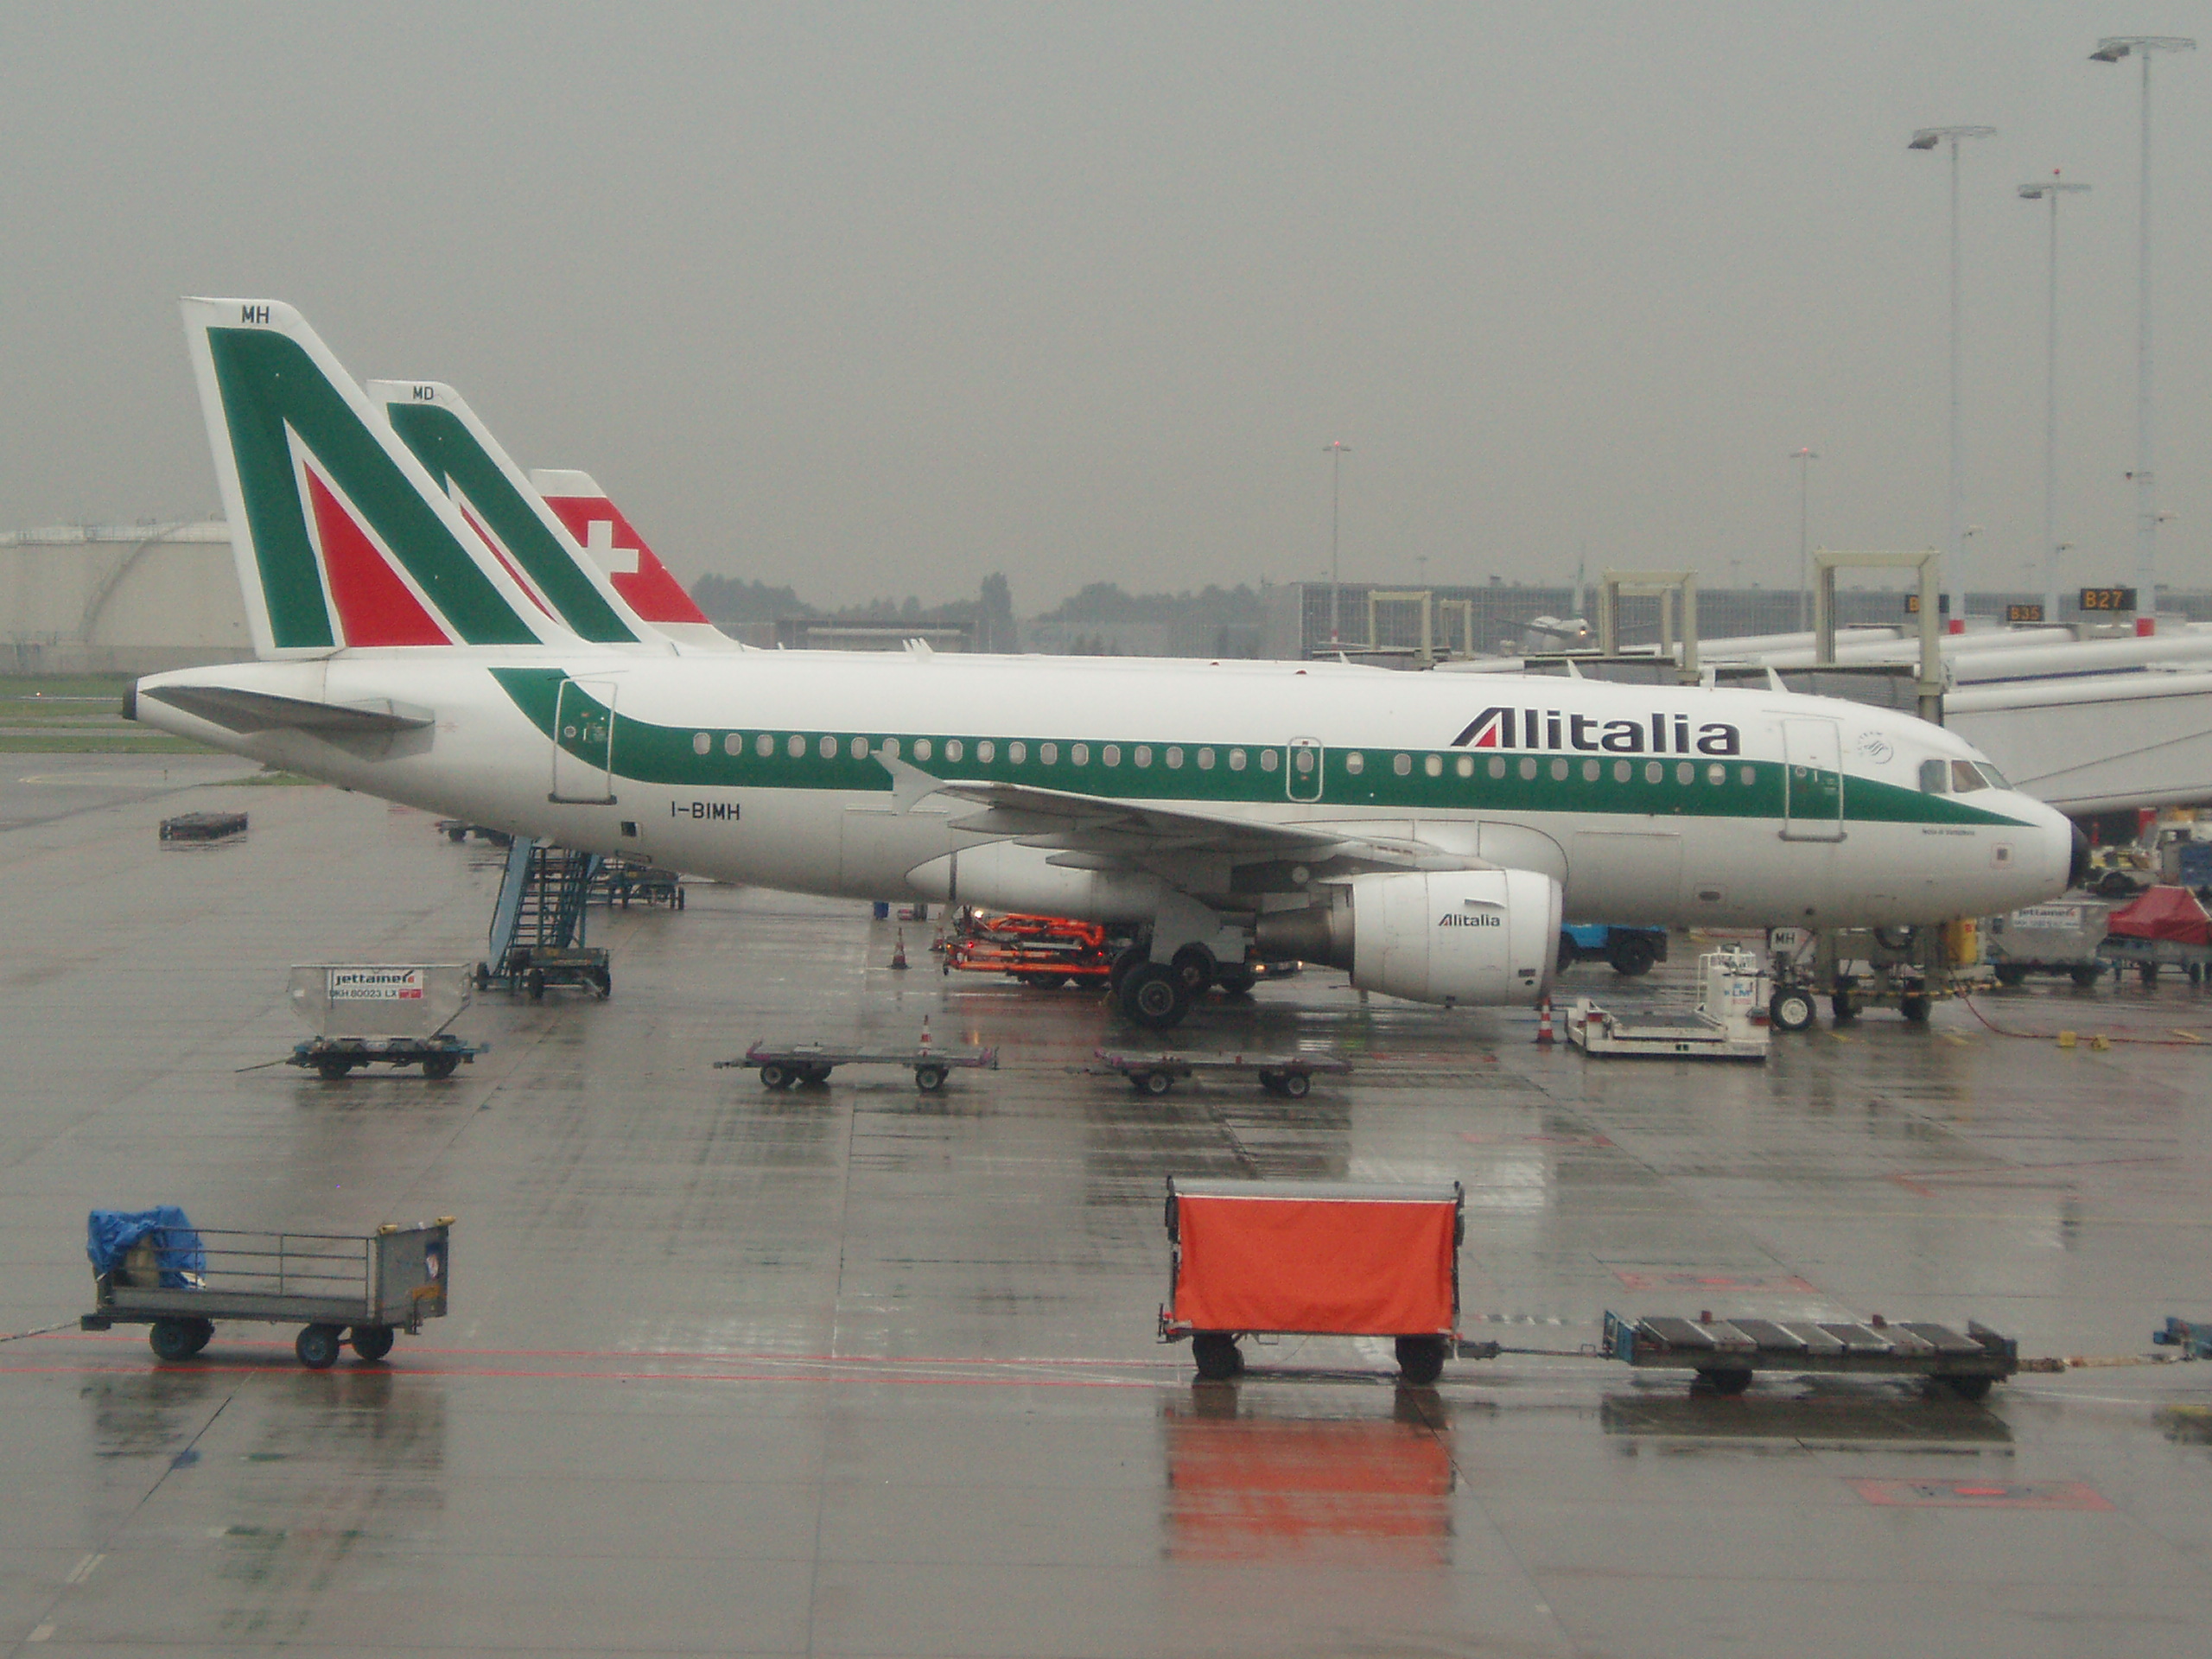 Strikes in Italy – Flights Cancelled